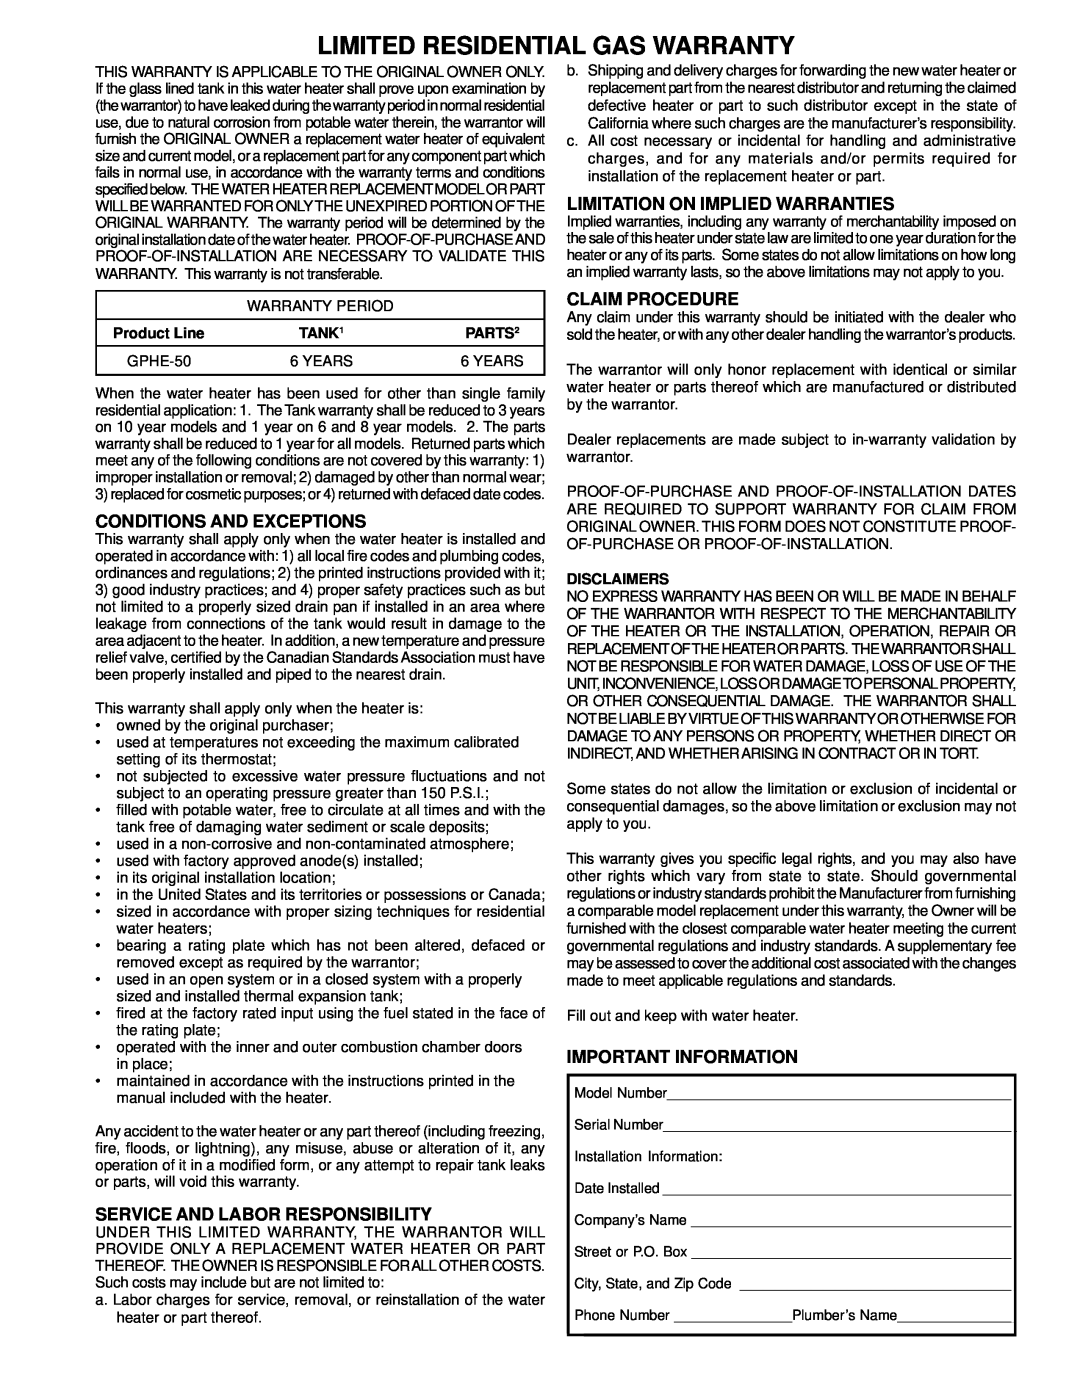 A.O. Smith ARGSS02708 Limited Residential Gas Warranty, Conditions And Exceptions, Service And Labor Responsibility, TANK1 